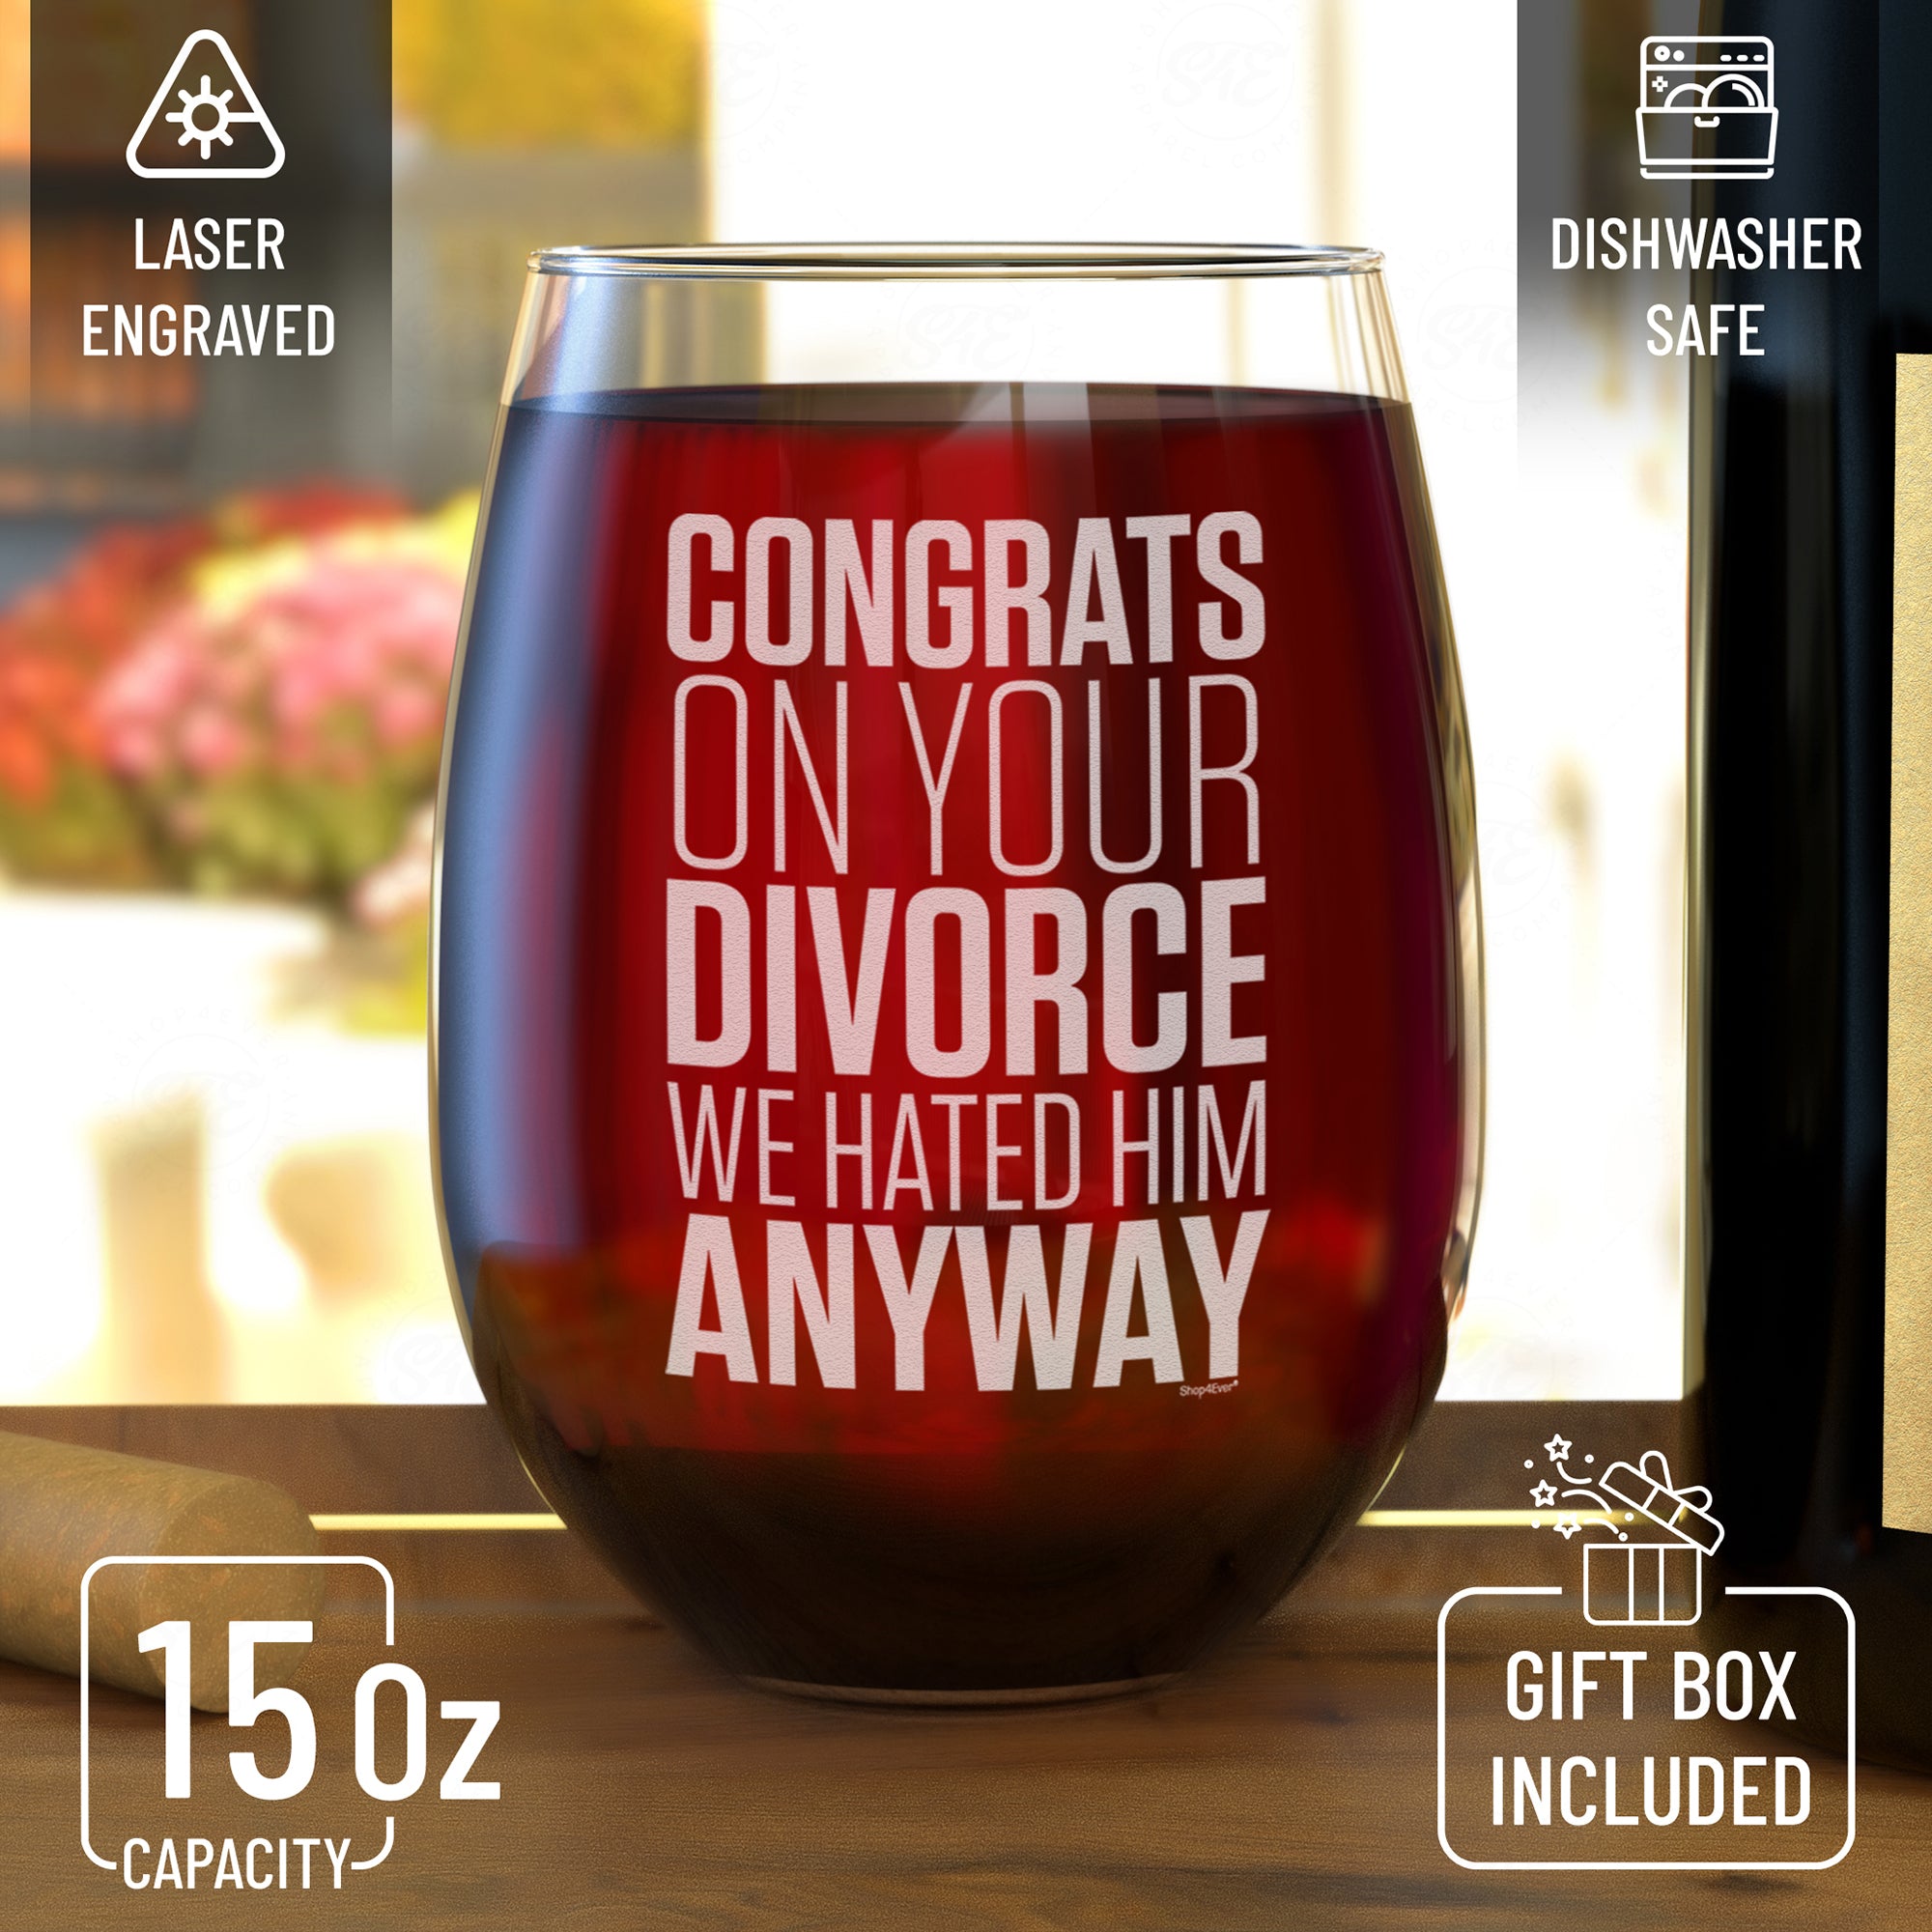 Congrats On Your Divorce We Hated Him Anyway Engraved Stemless Wine Glass Funny Divorce Gift